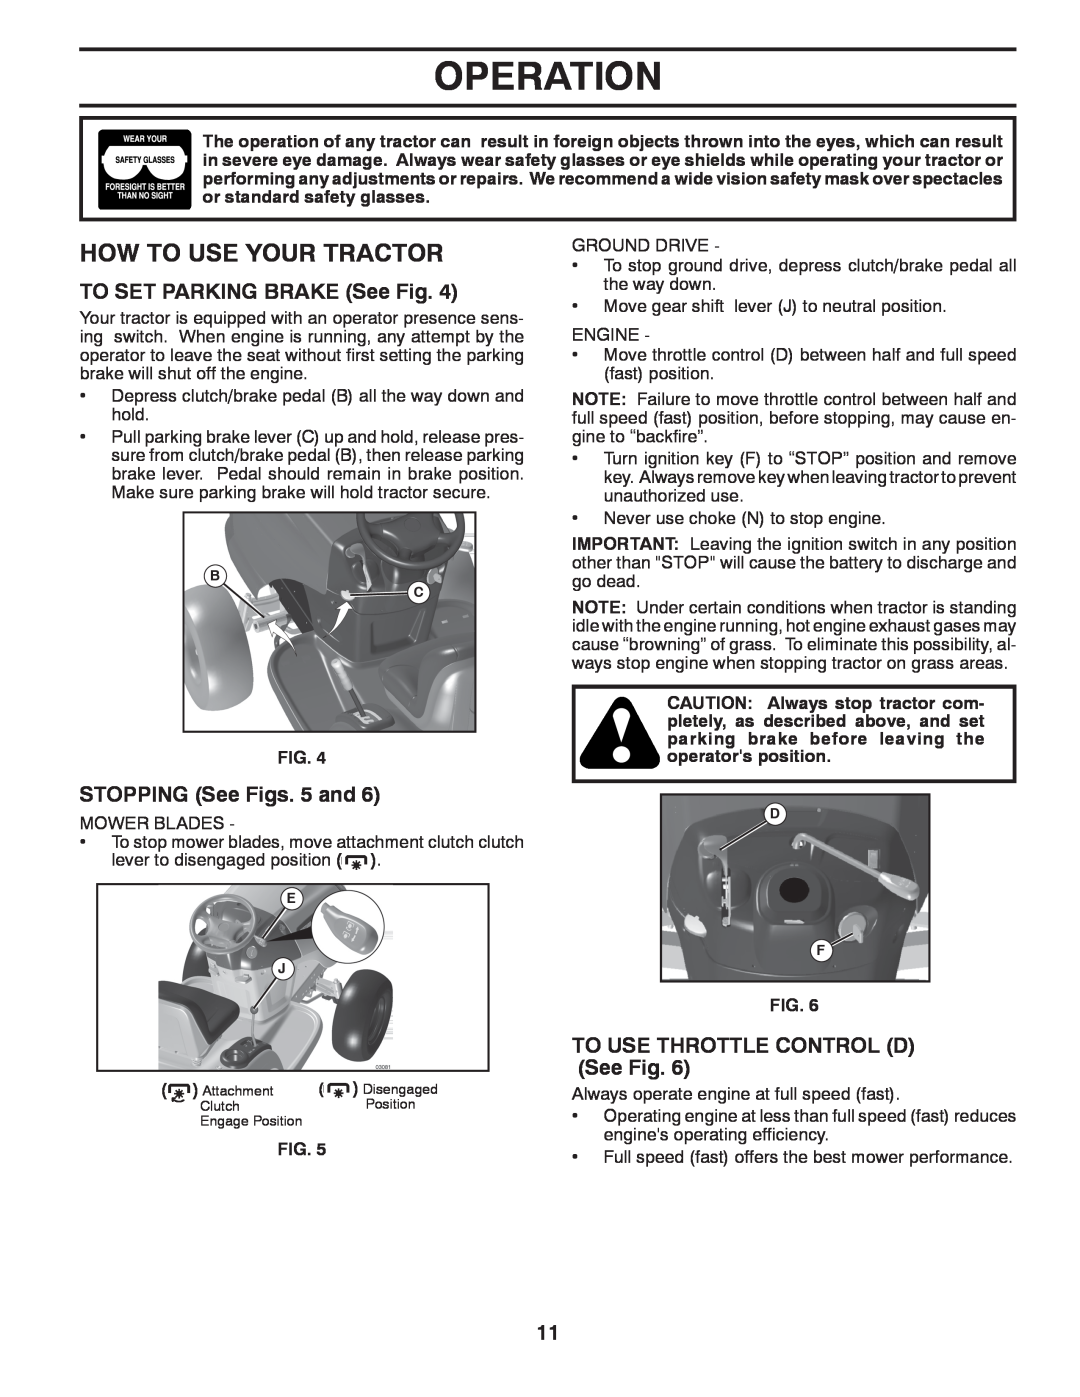 Husqvarna LT1597 manual How To Use Your Tractor, TO SET PARKING BRAKE See Fig, STOPPING See Figs. 5 and, Operation 